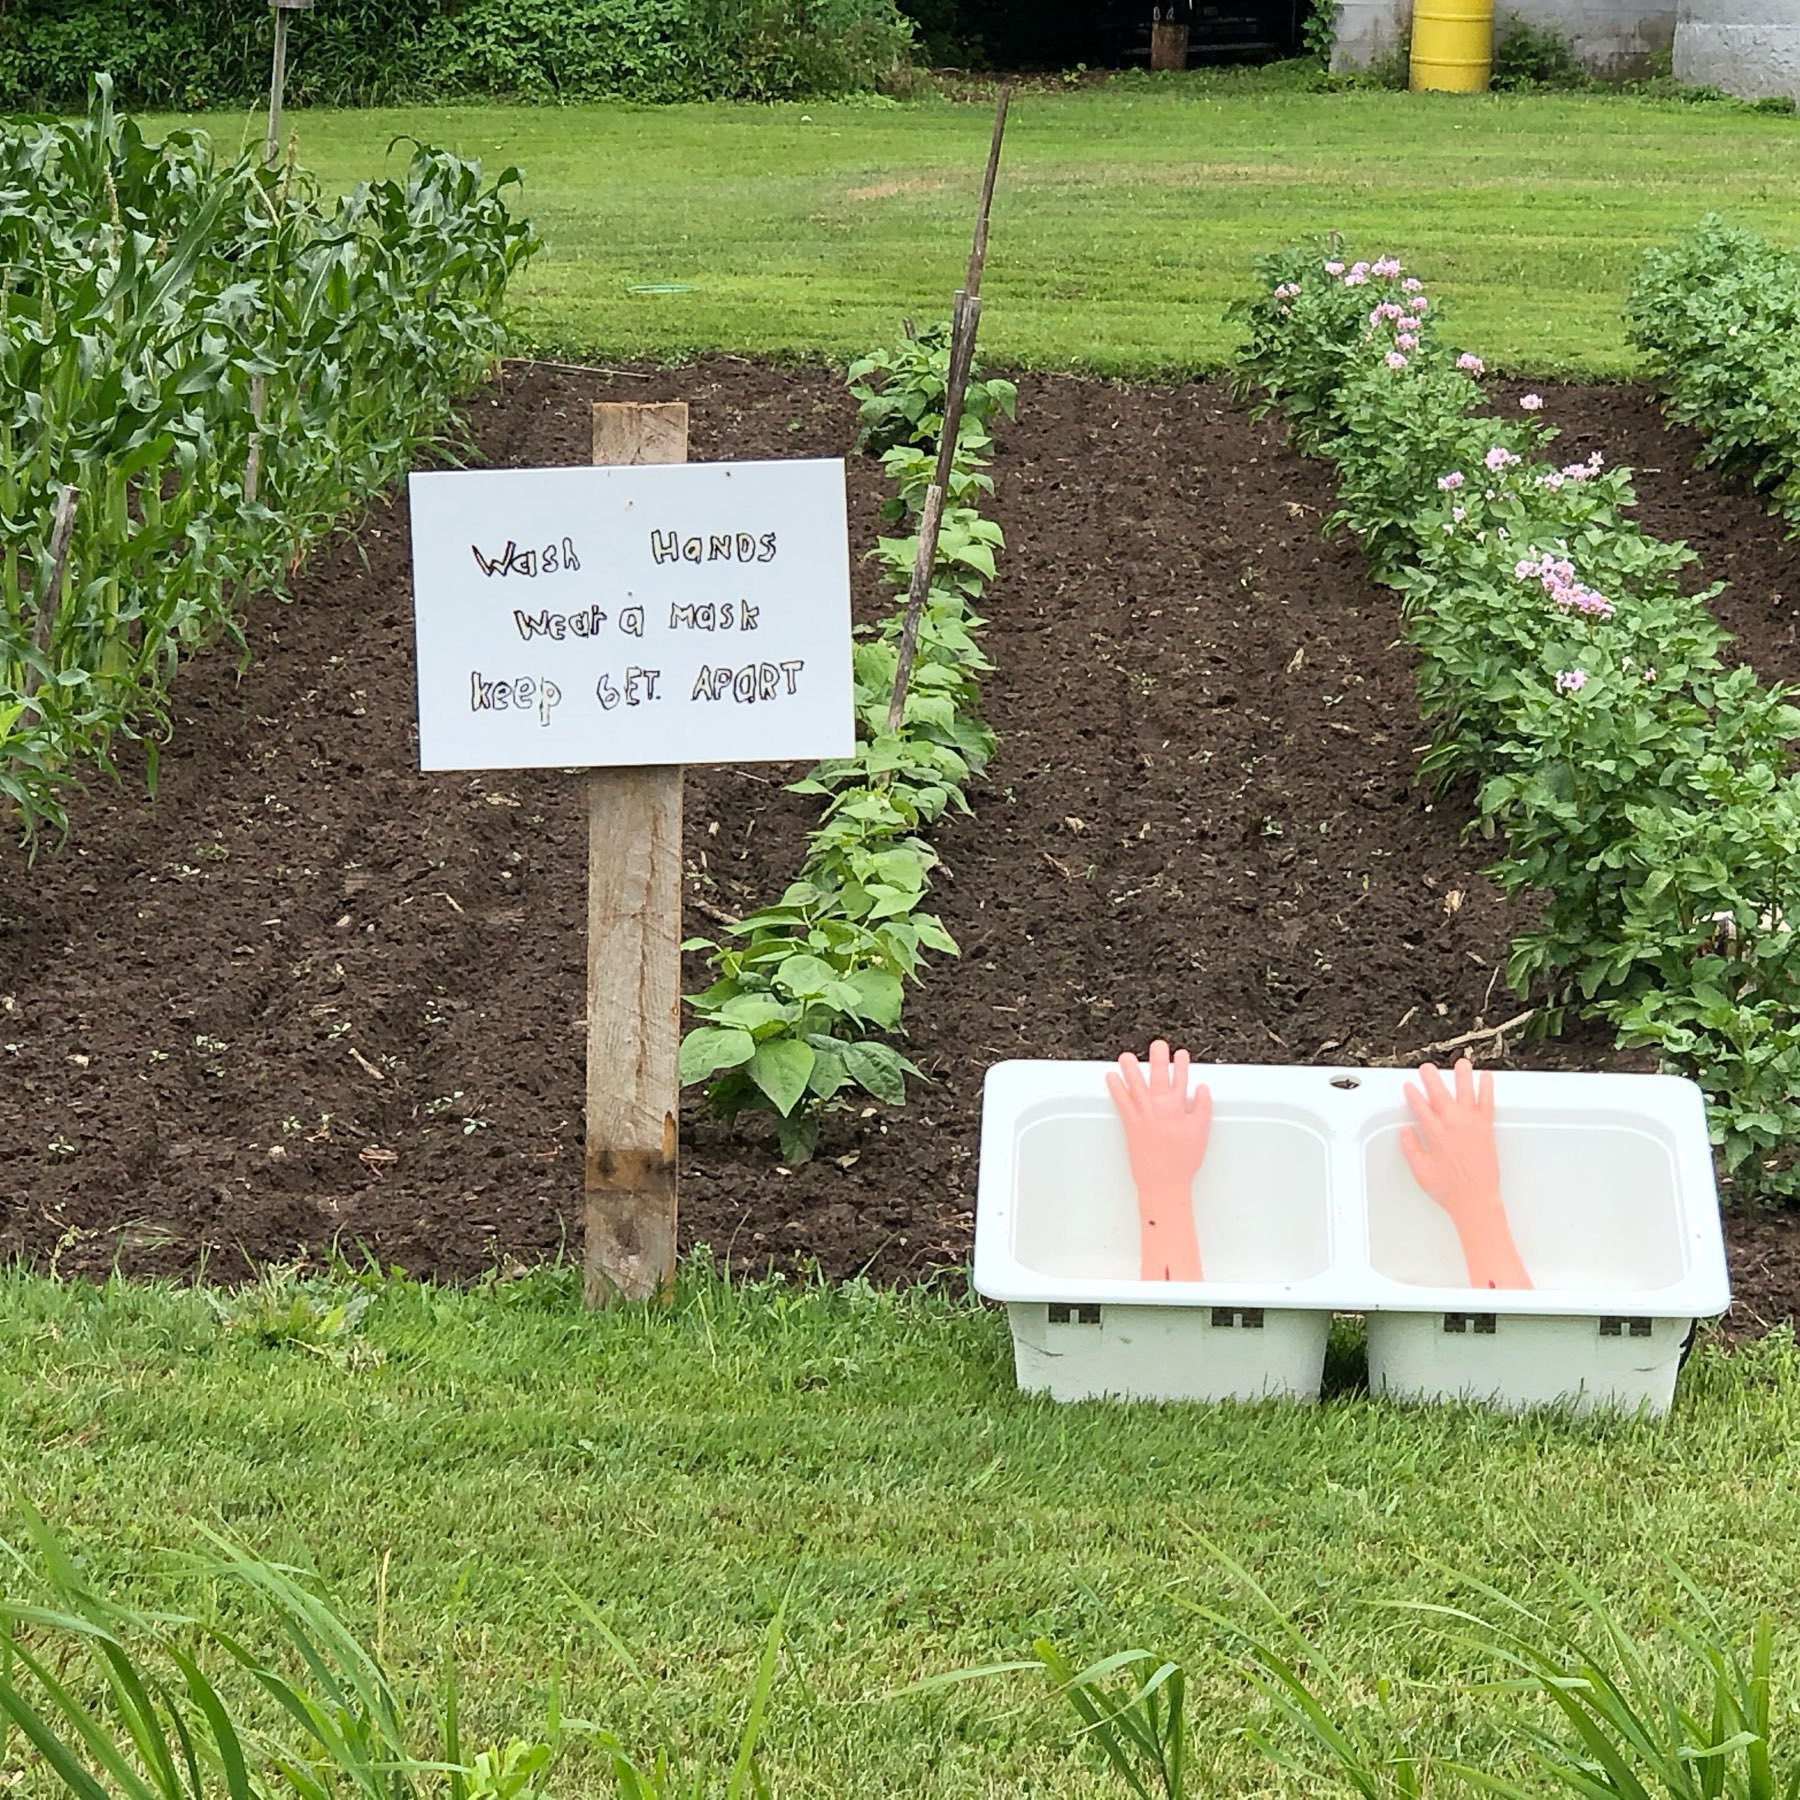 a pair of plastic hands in a diuble white sink sitting on the ground in front of a vegetable garden witha covid safety message beside